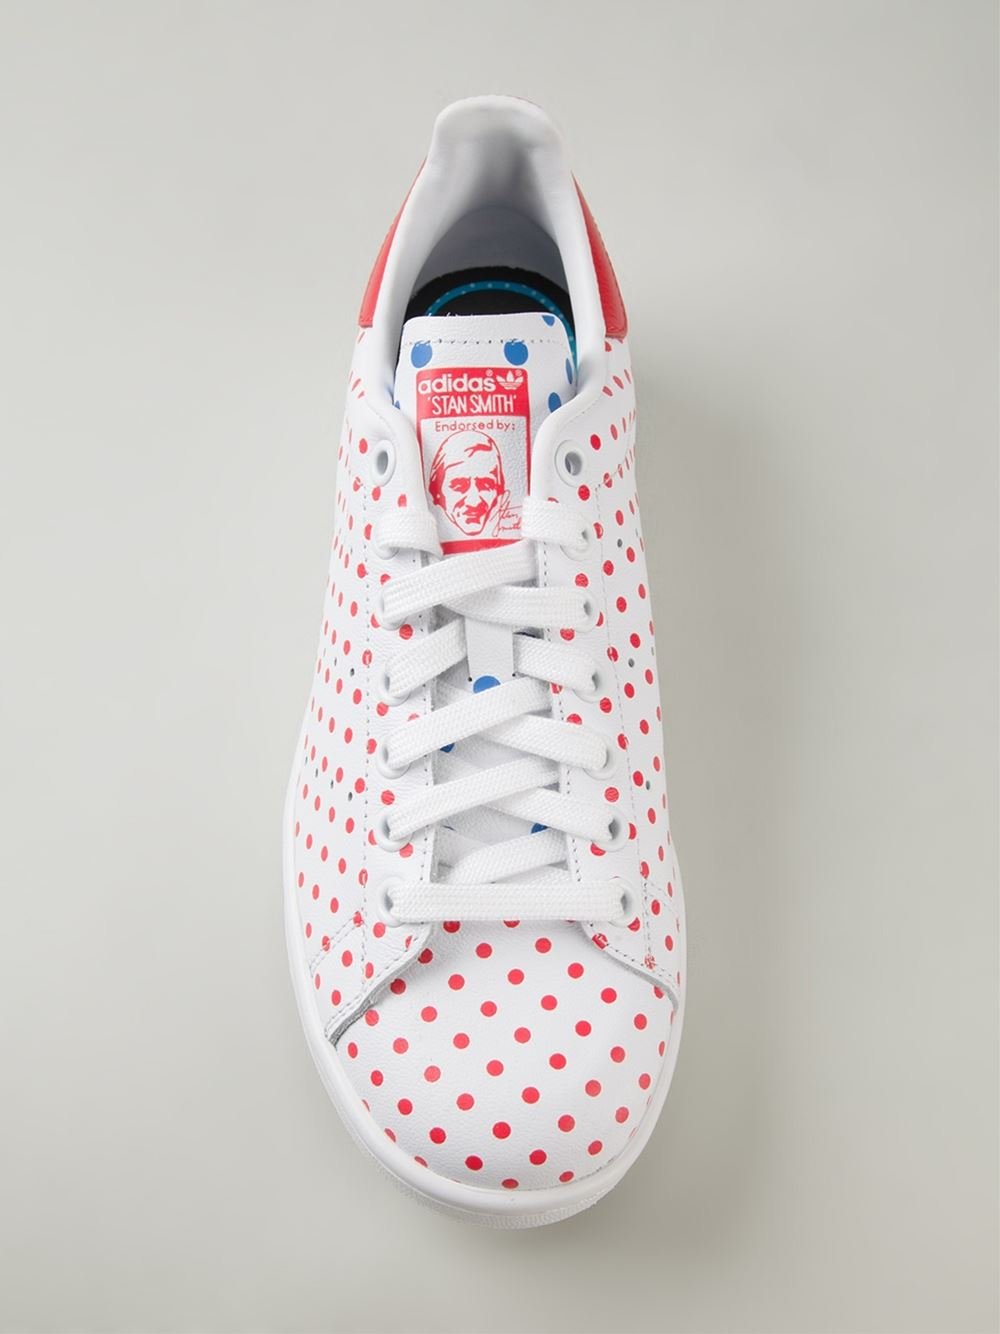 adidas Stan Smith Polka Dot Sneakers in 